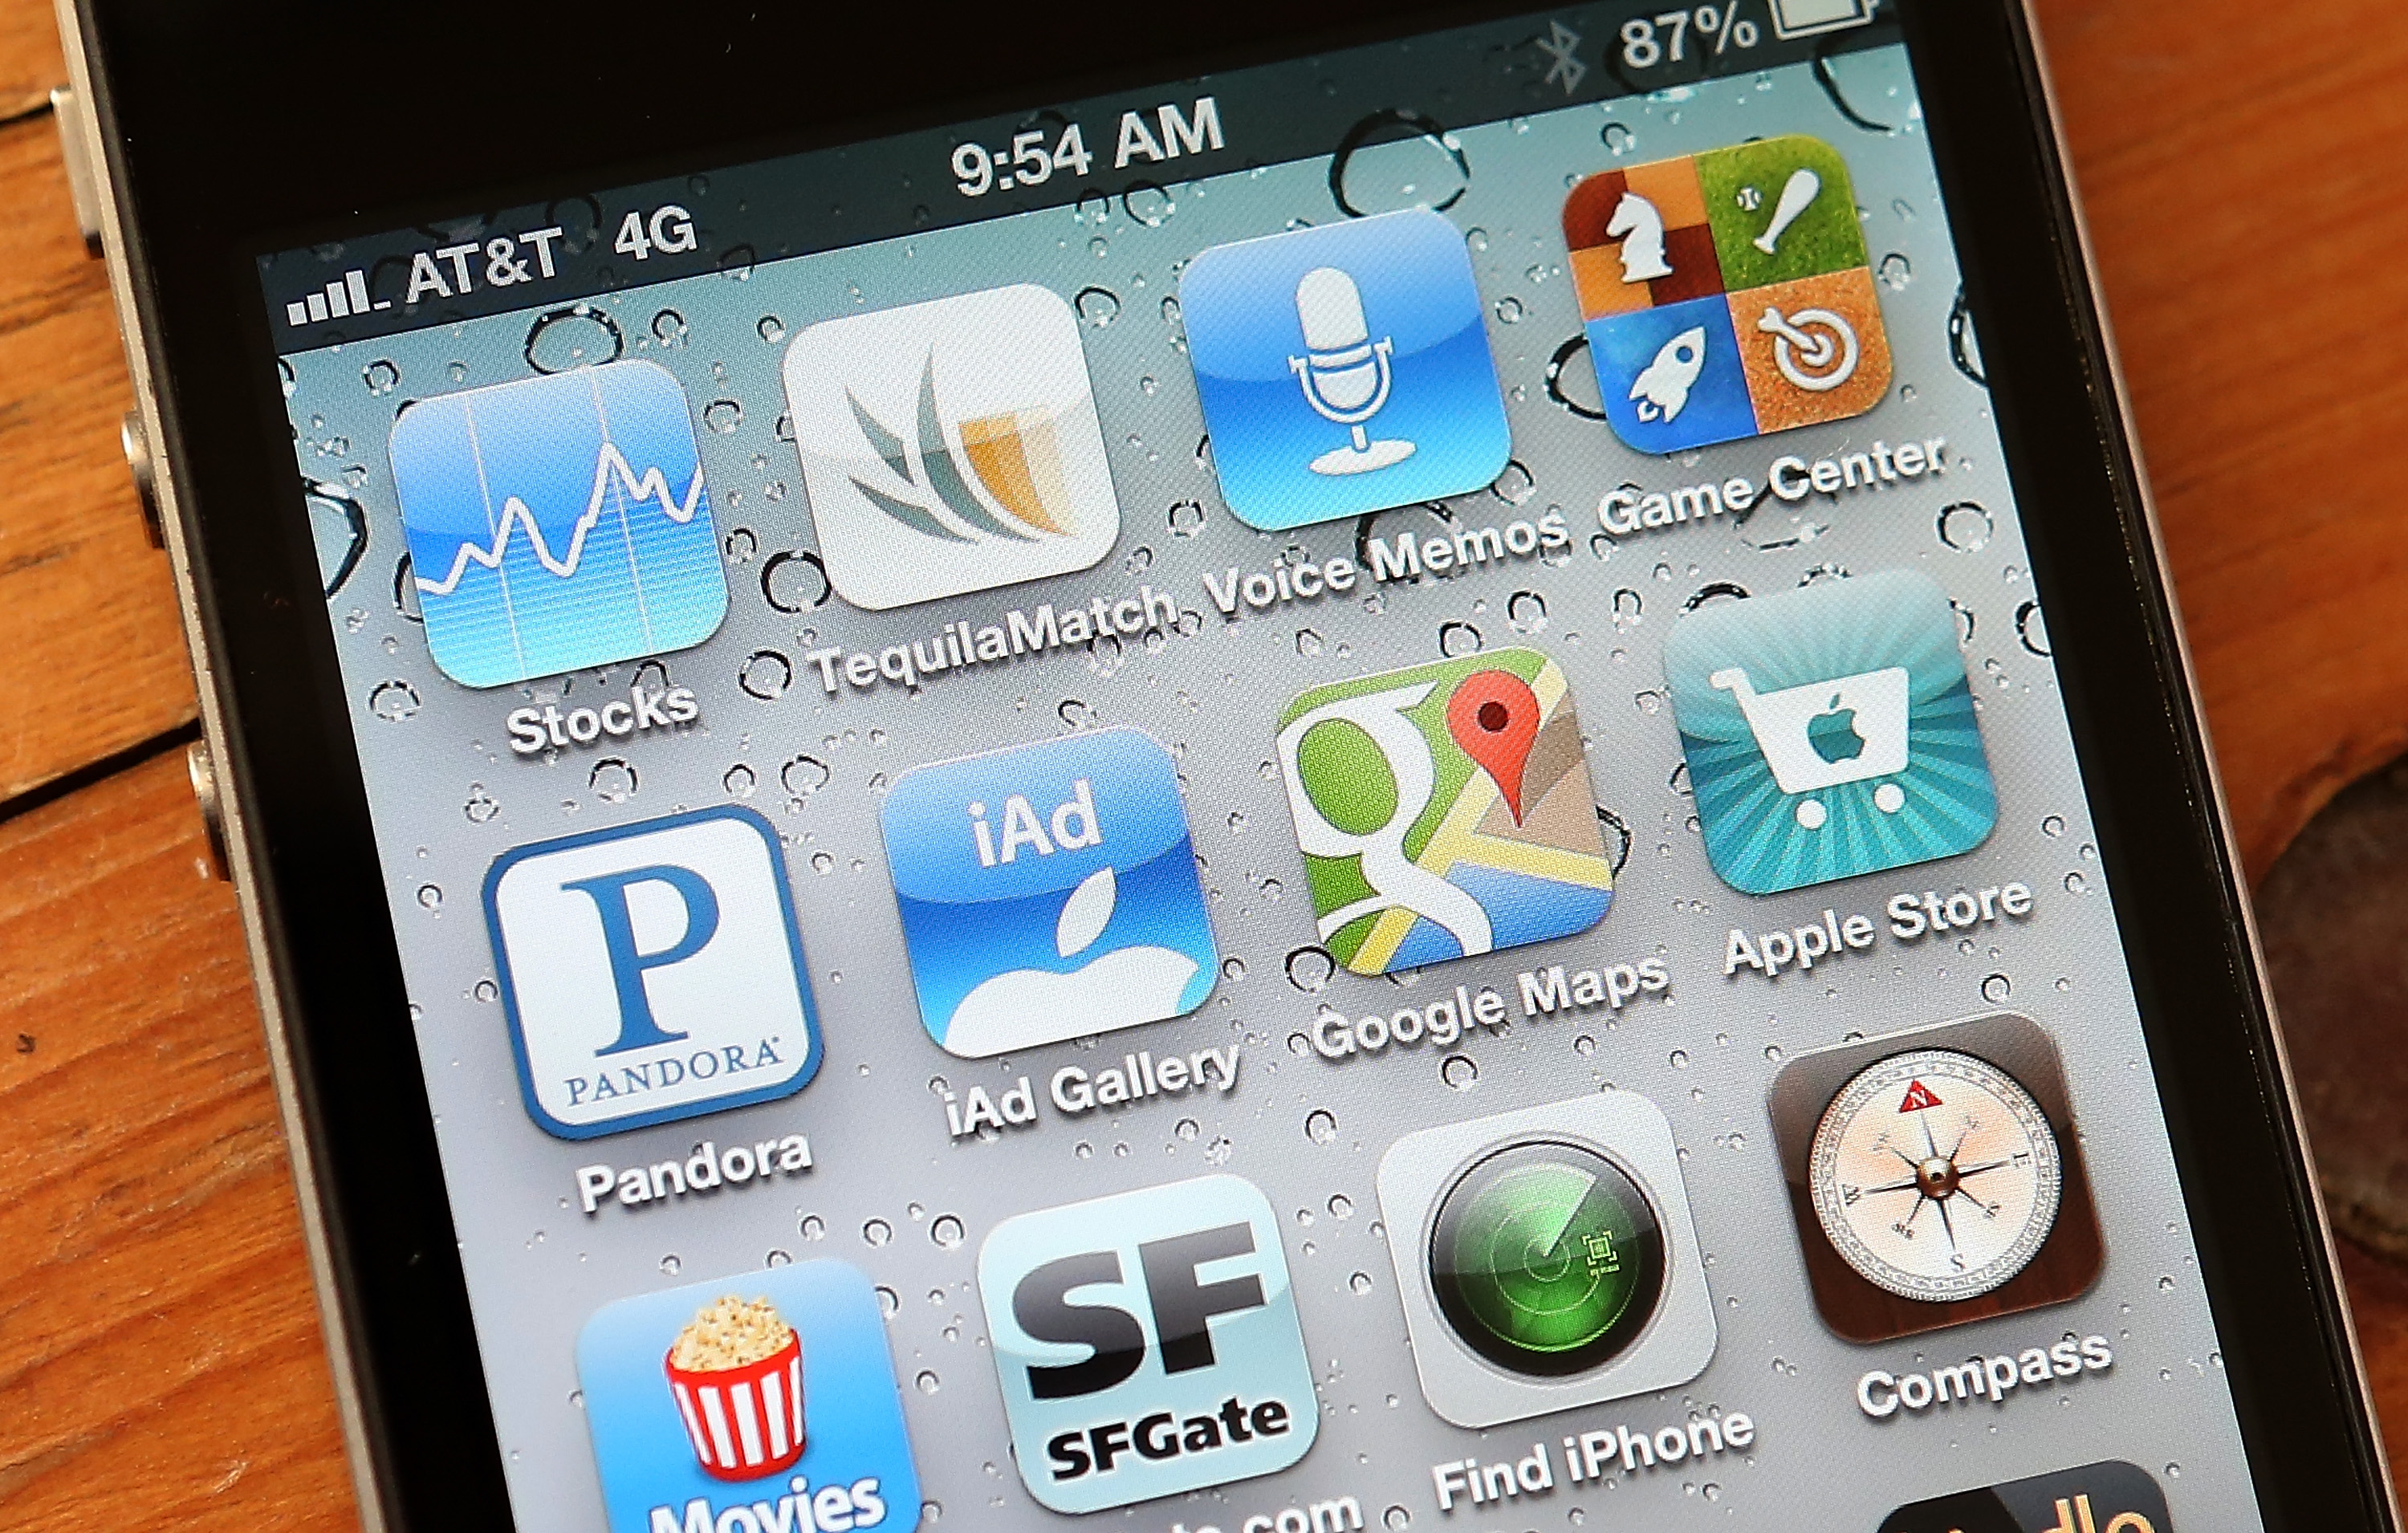 NSA planned to hijack app stores to spy on users